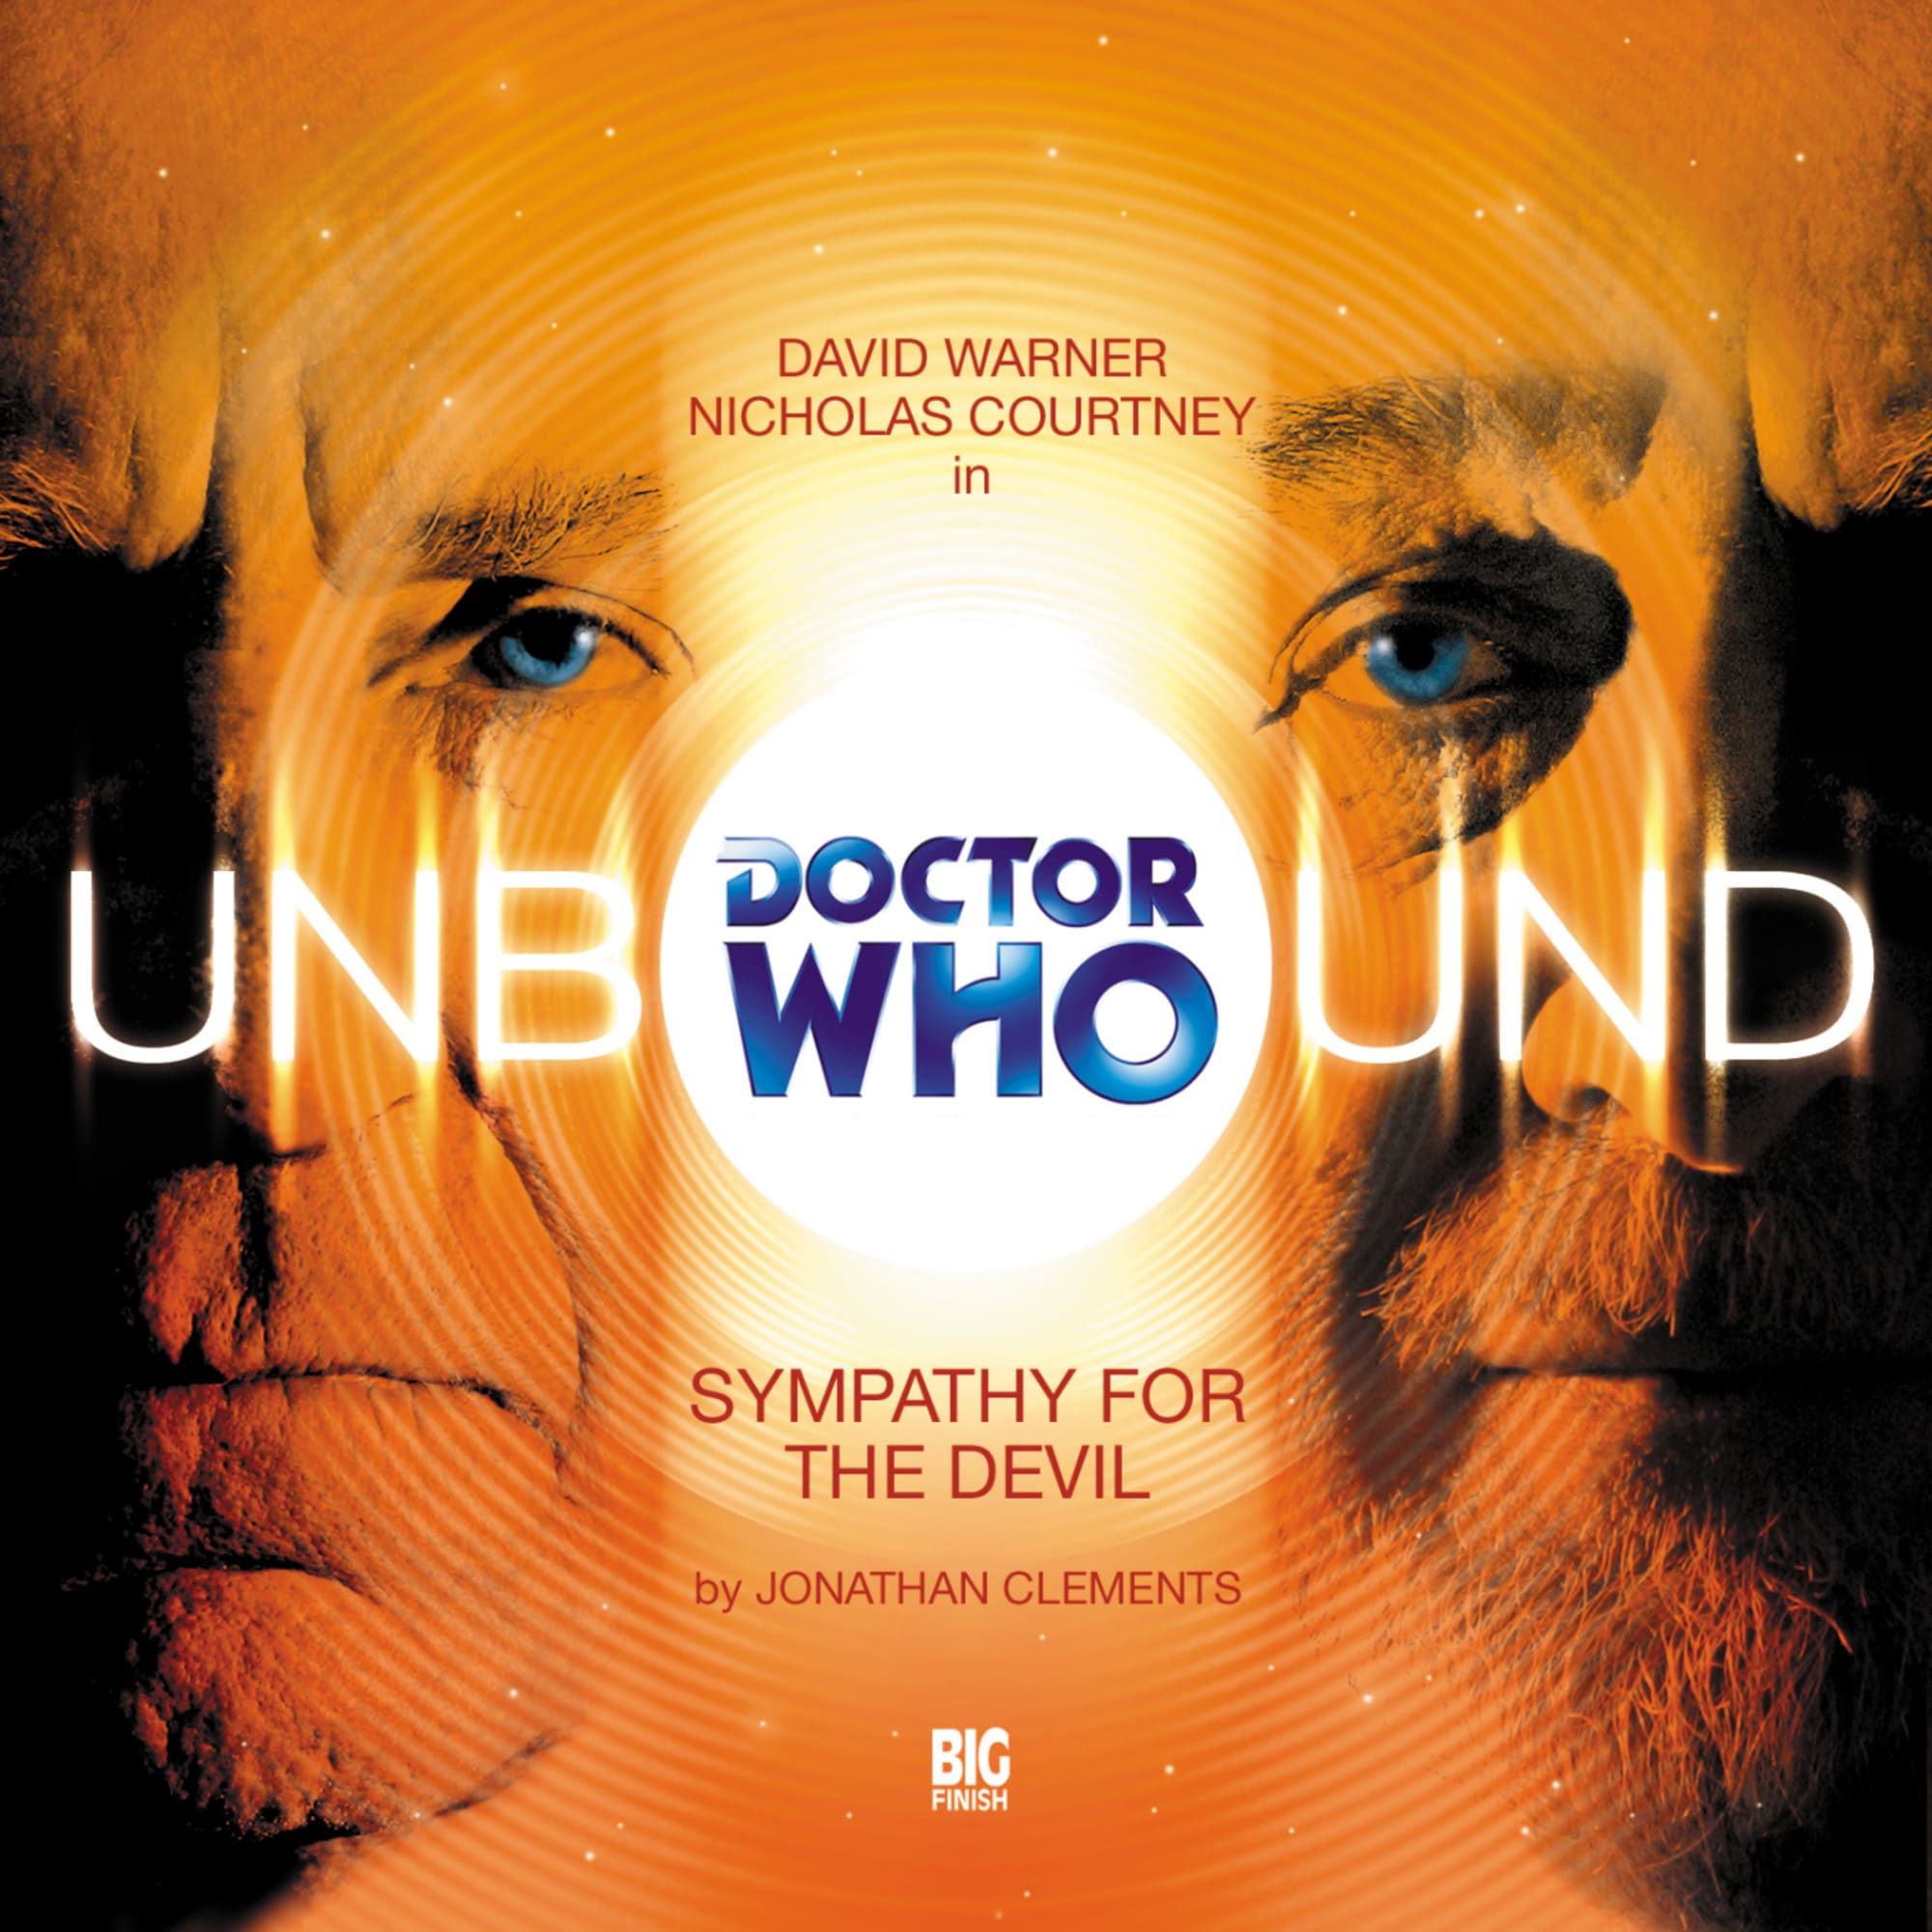 Doctor Who review Sympathy for the Devil introduces David Warner's Doctor